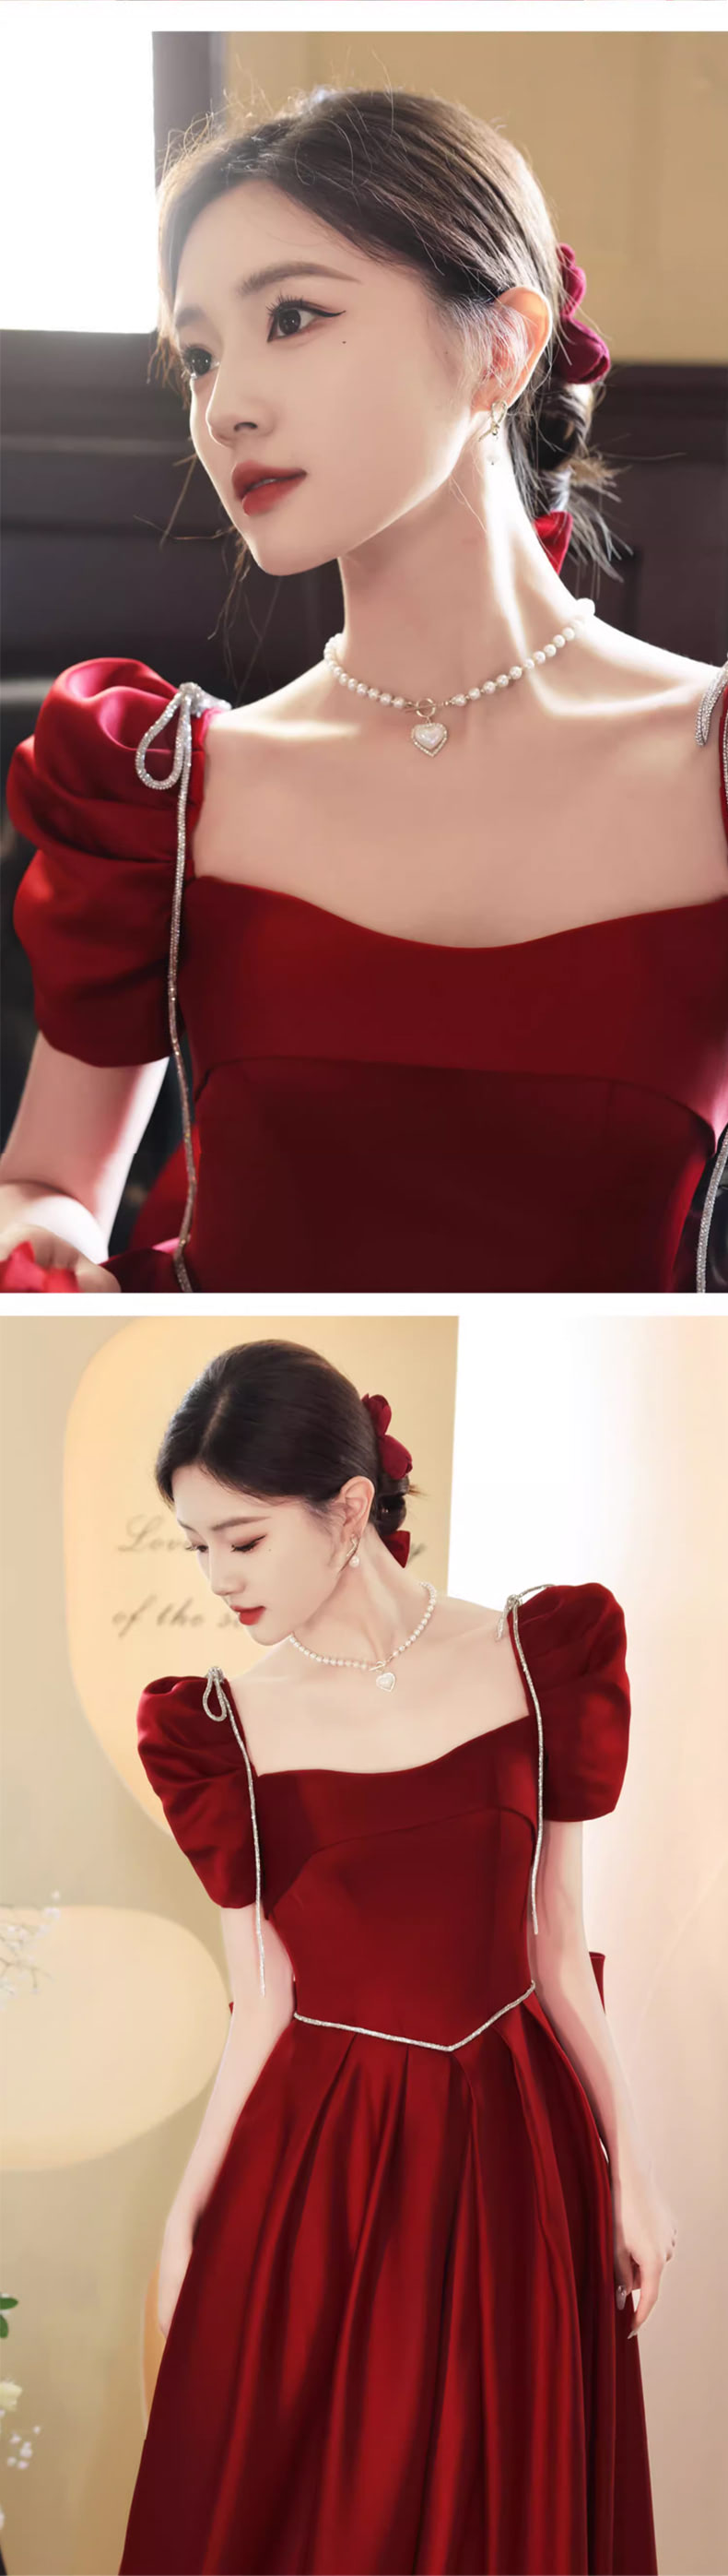 Simple-Wine-Red-Puff-Sleeves-Formal-Dinner-Toast-Prom-Evening-Dress14